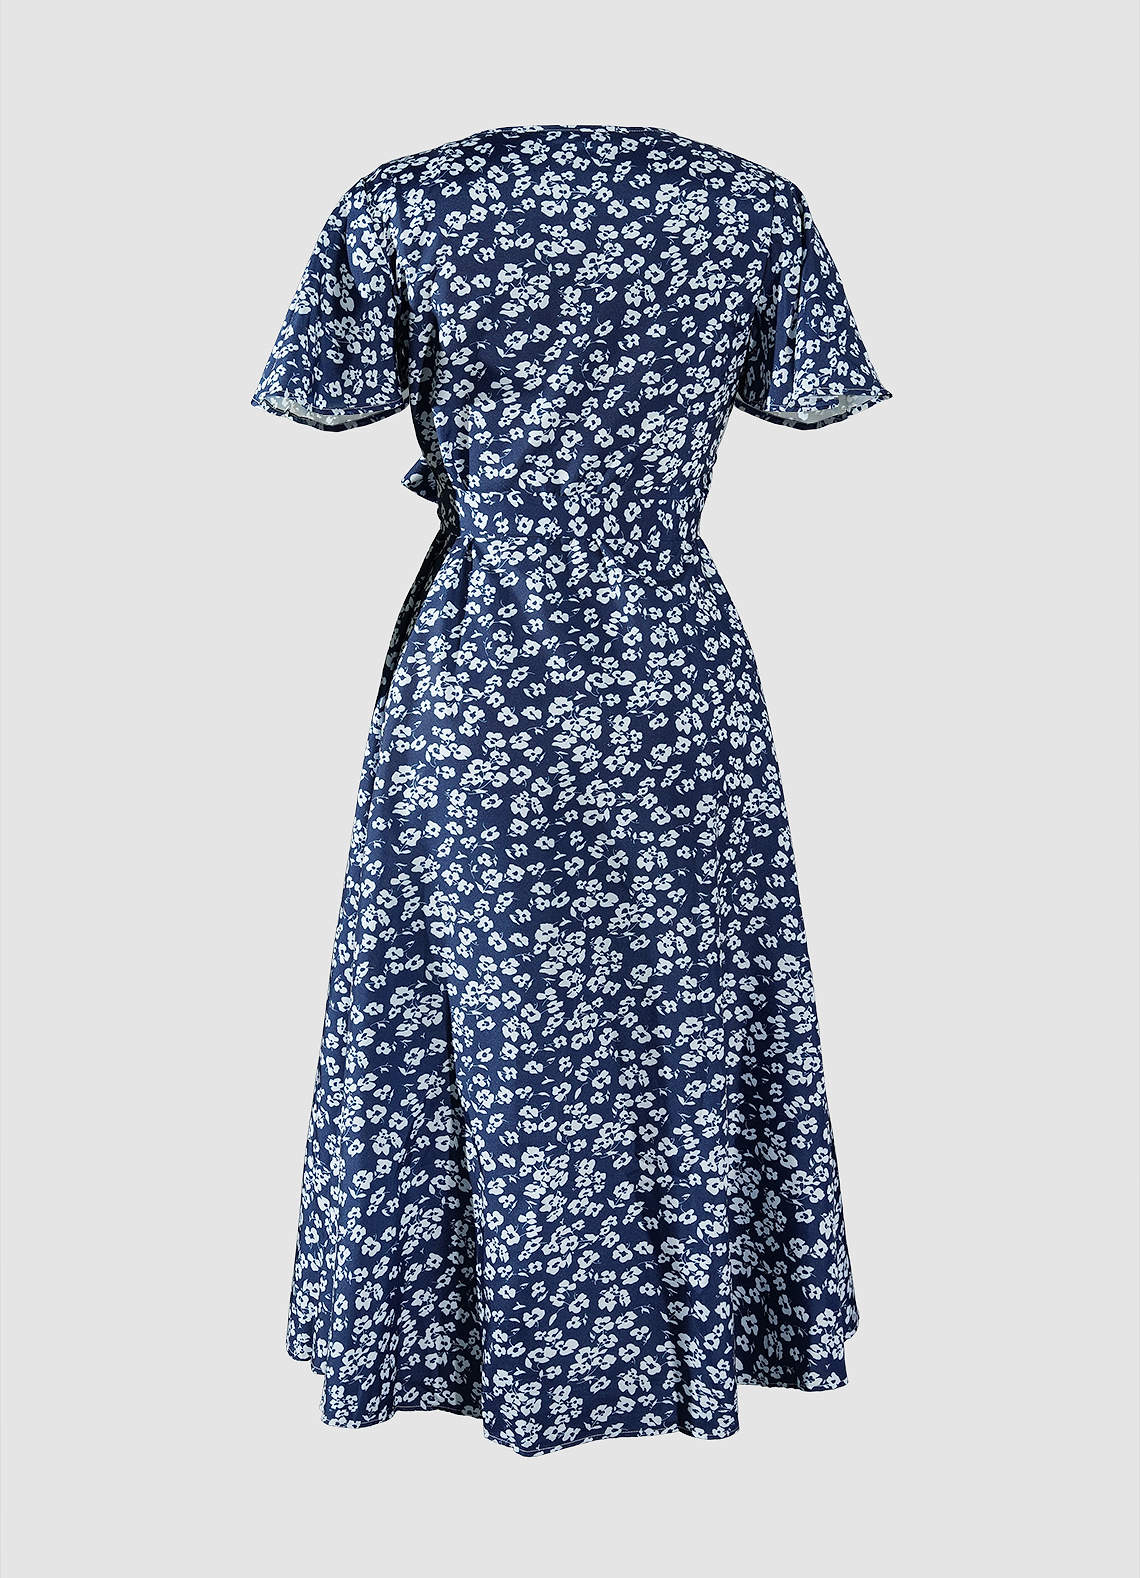 Express Yourself Navy Blue Floral Print Wrap Dress image1